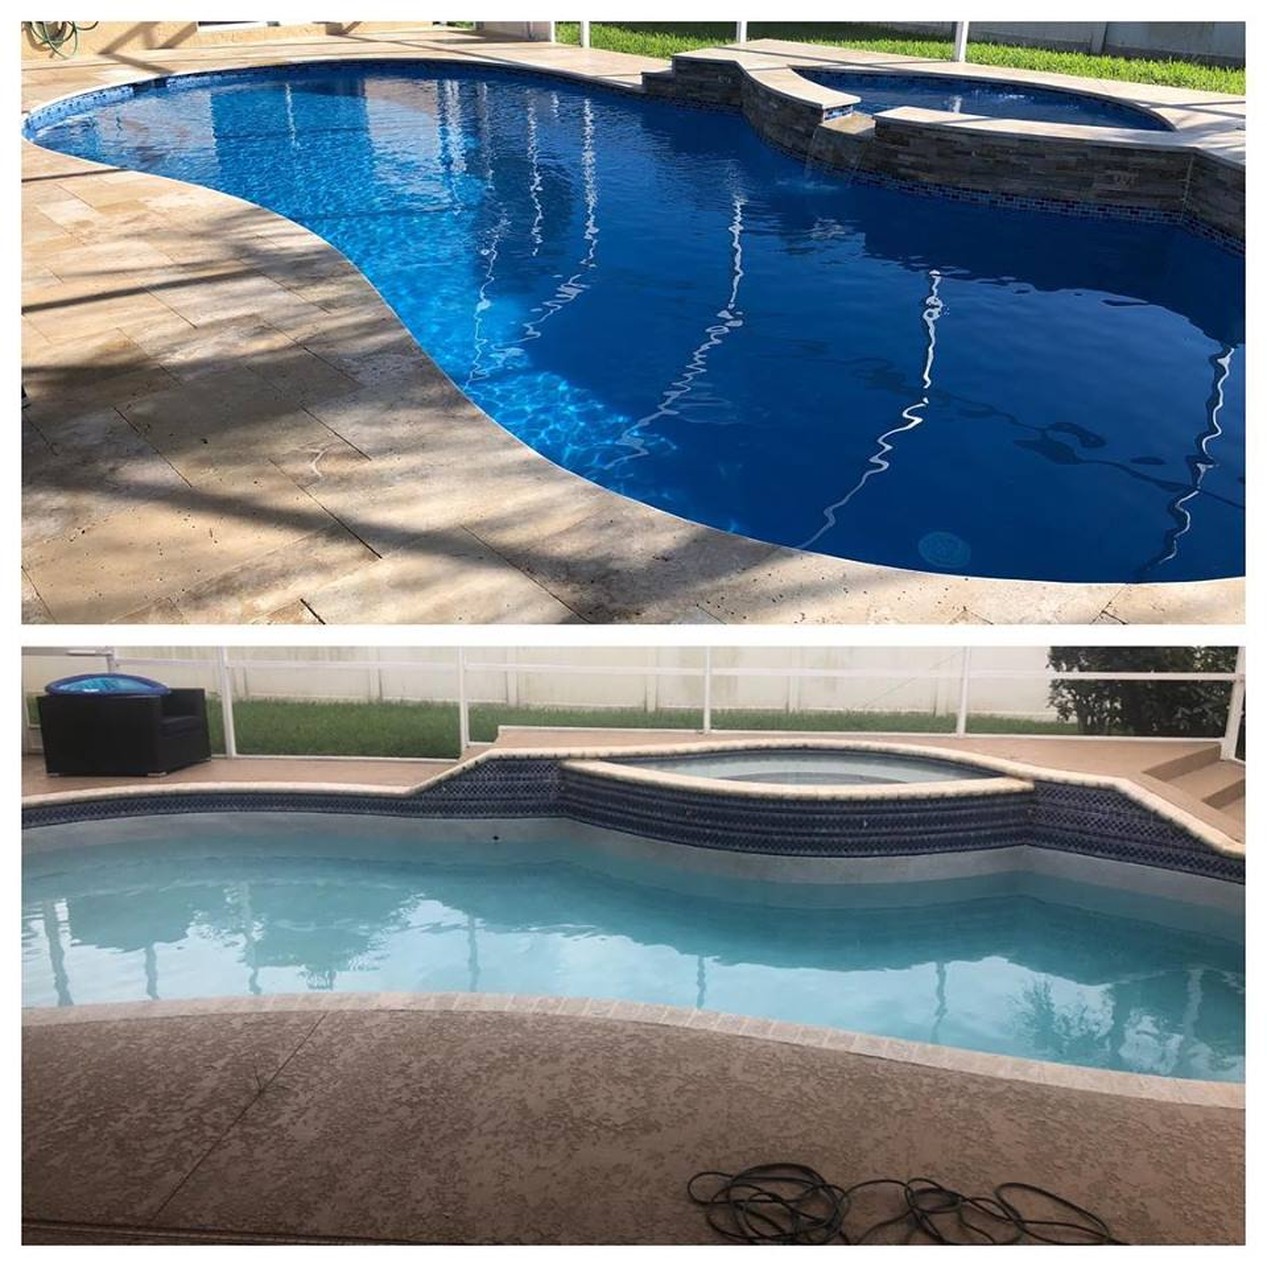 Pool Deck Remodeling | Pool Tech Stores